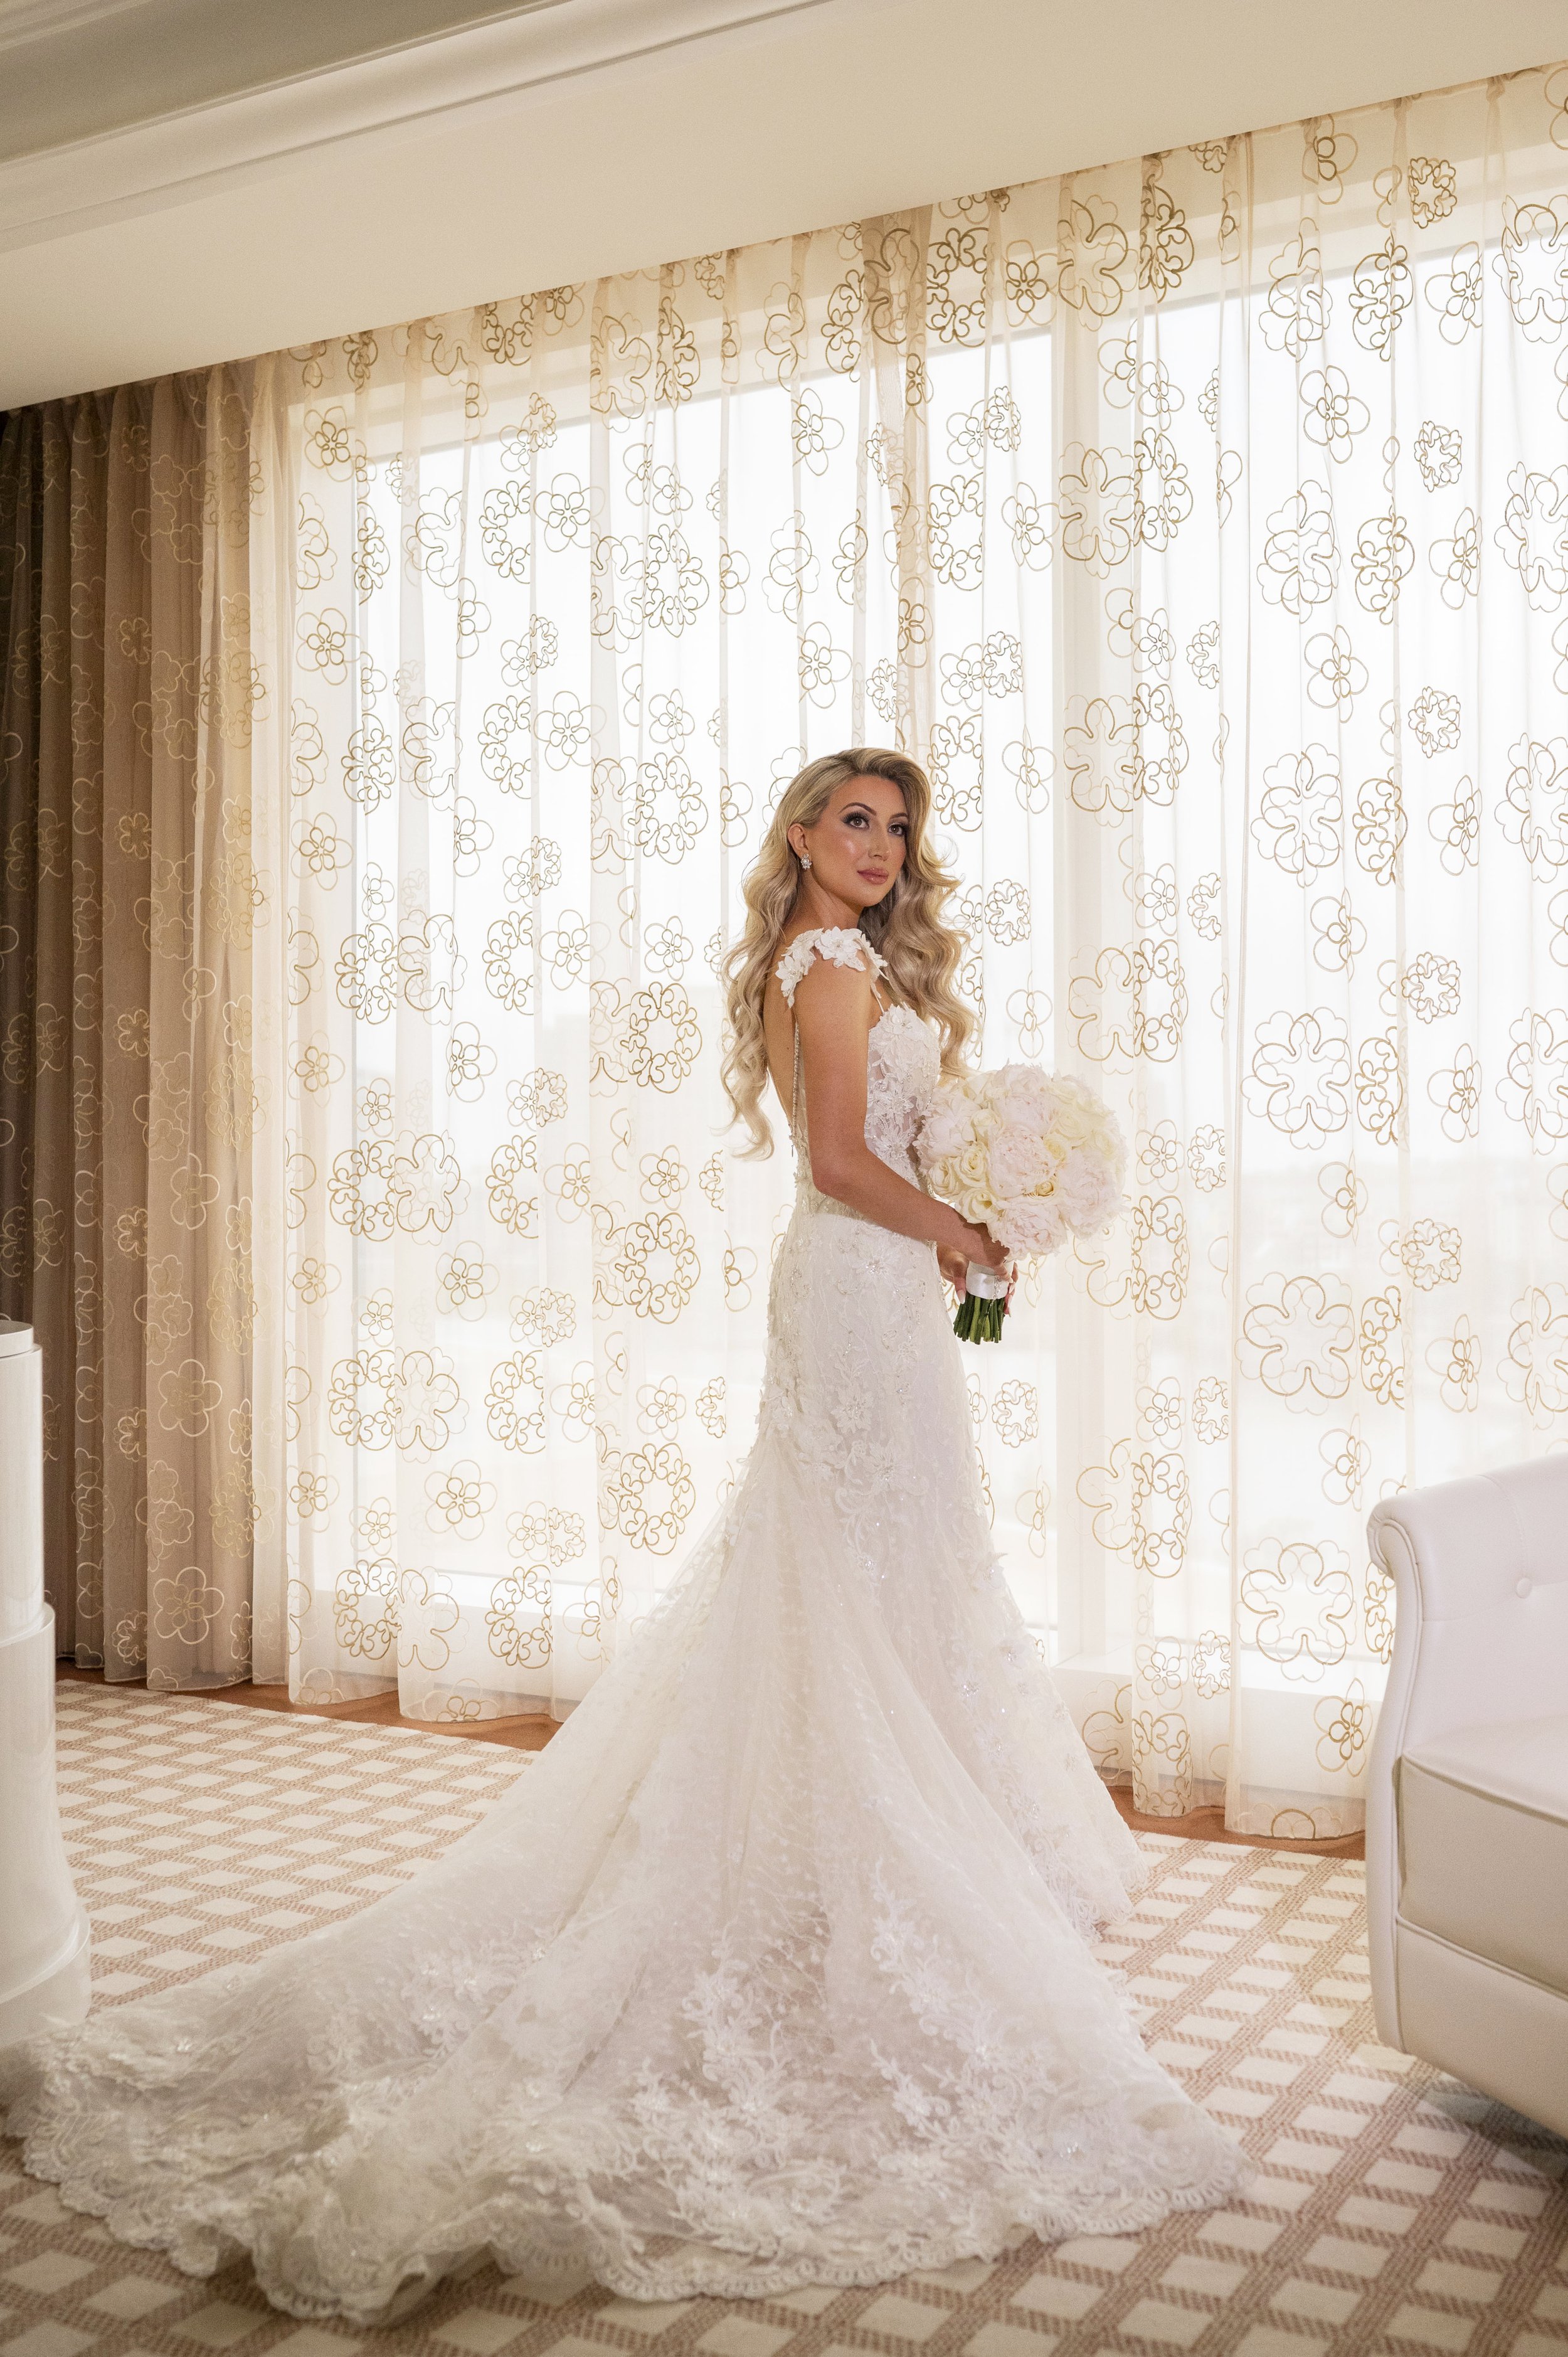 bride wearing gown holding bouquet posing in her bridal suite